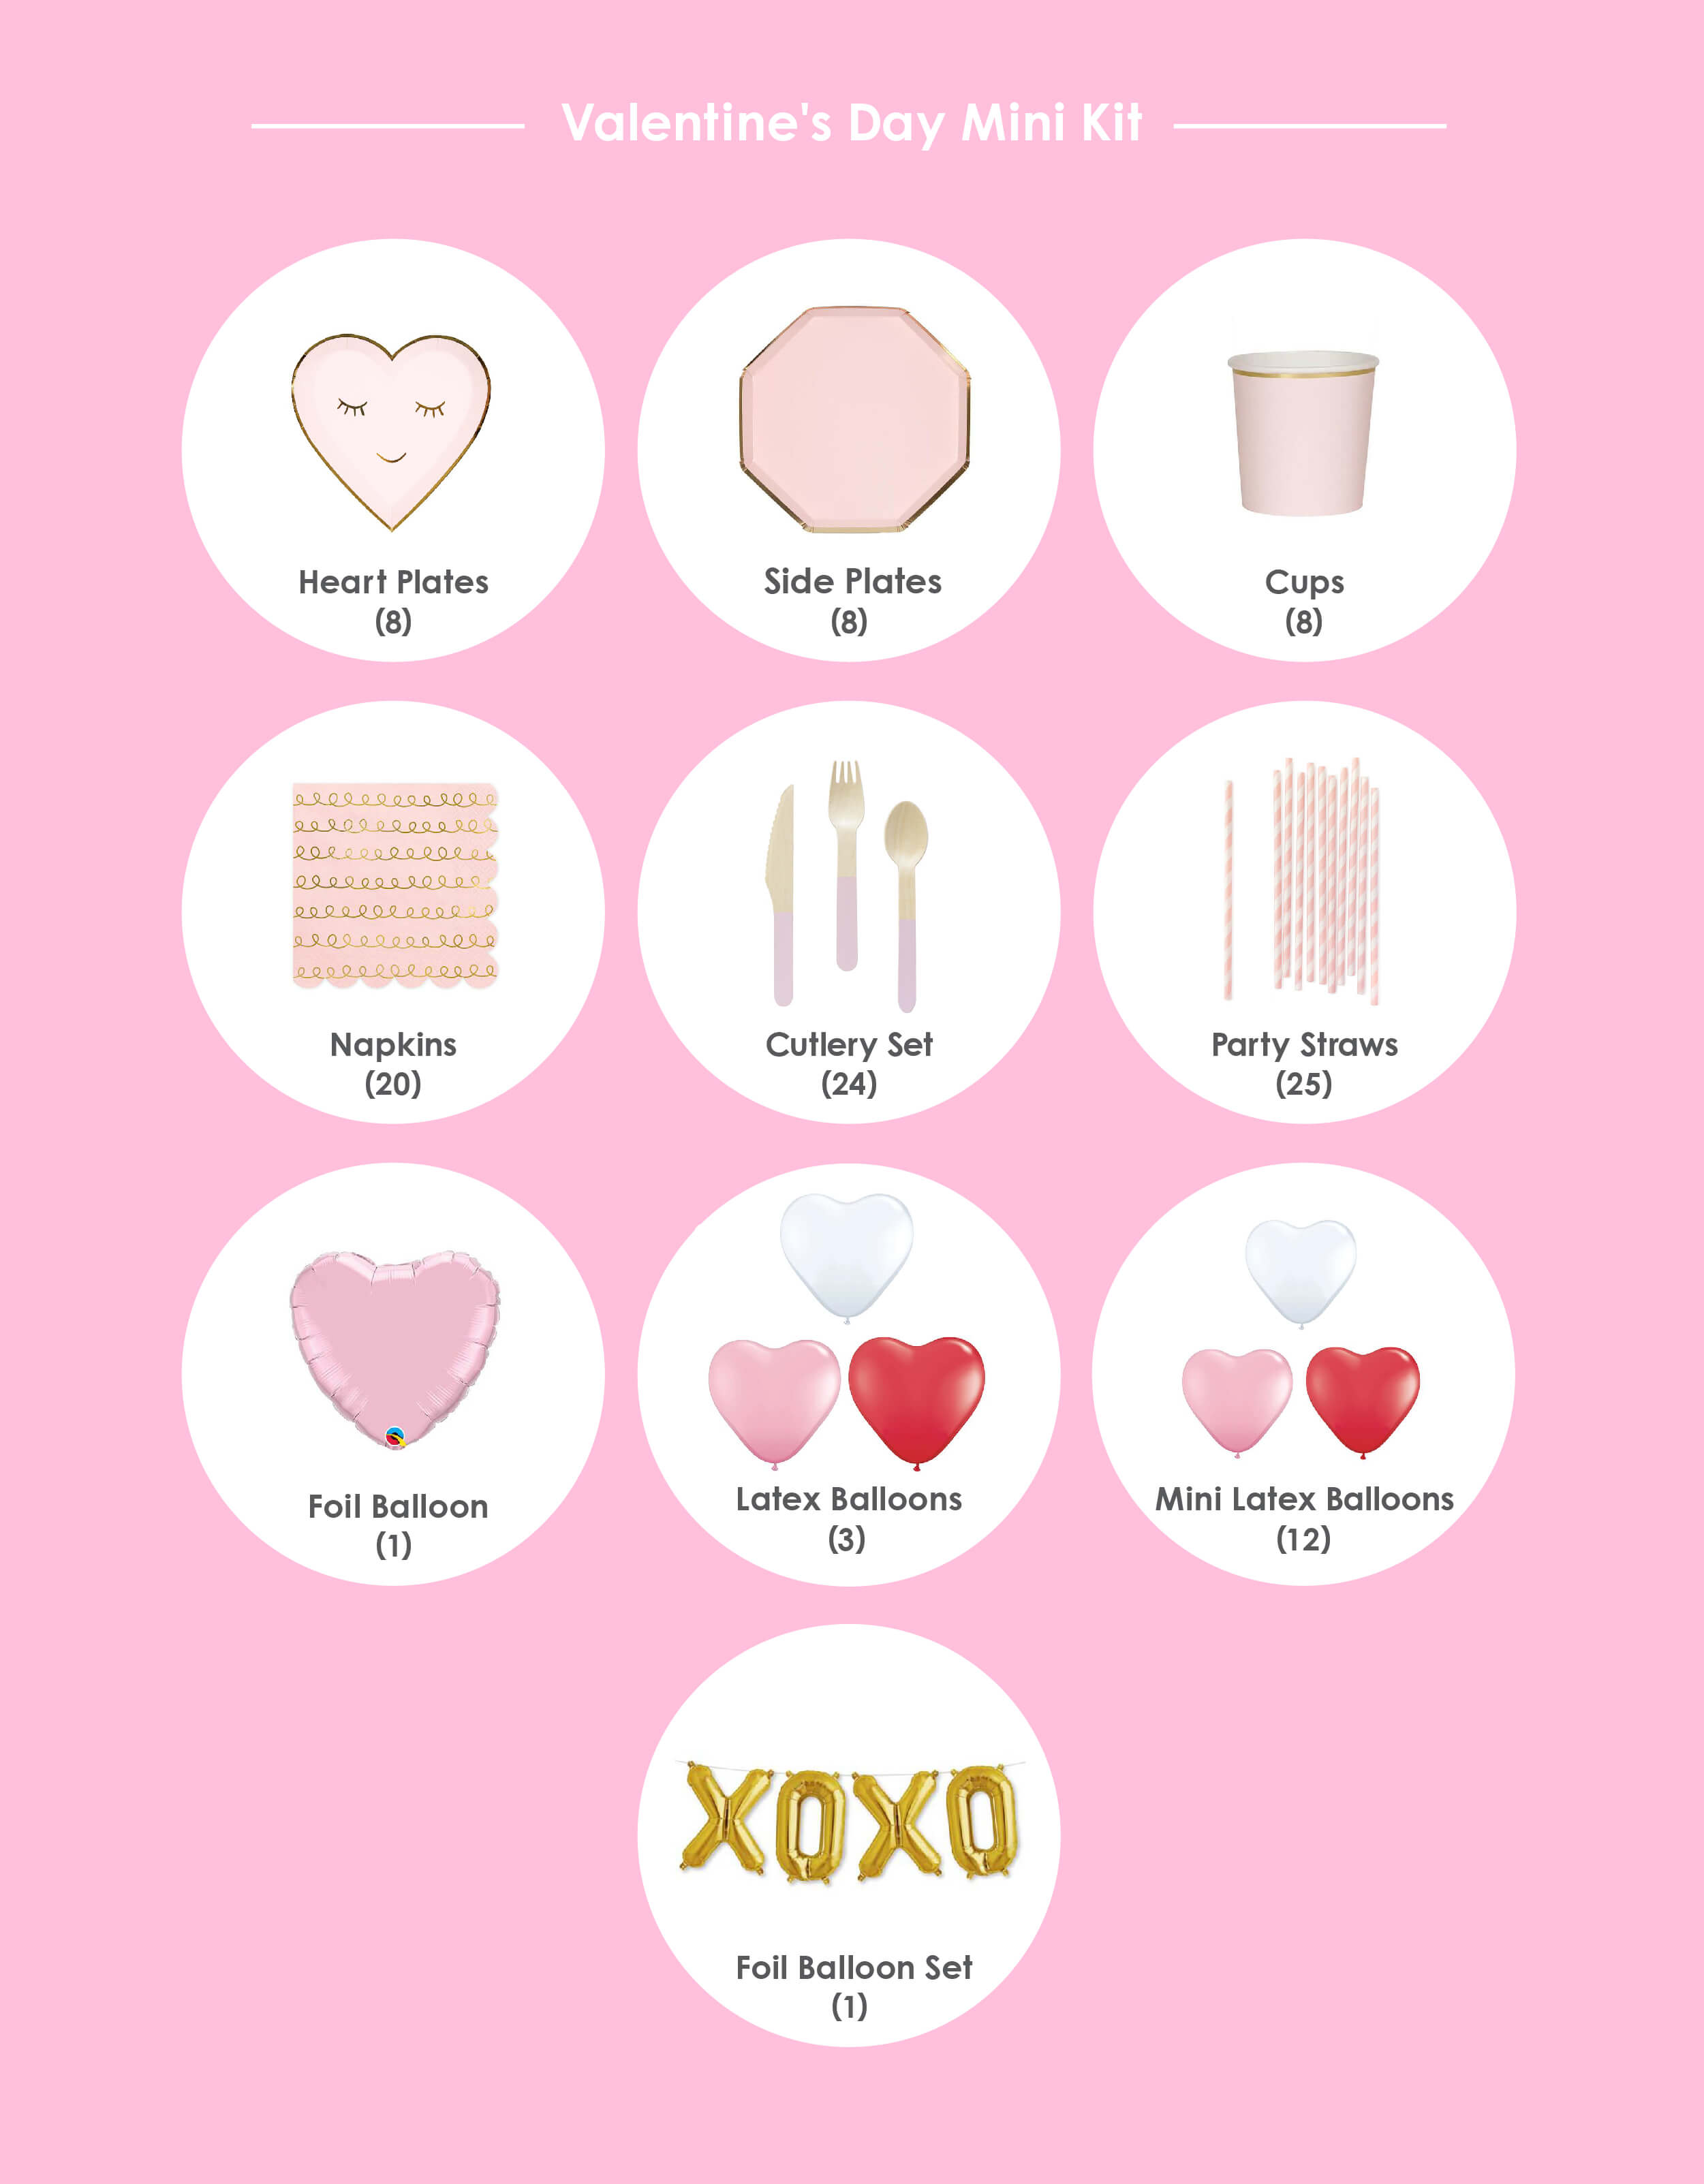 Momo party Valentine's Day Mini Party Kit, item list of Meri Meri Blushing Heart Plates, Pale Pink Side Plates, Pale Pink Tumbler Cups, Party Deco Pink and Gold Tracing Patterns Large Napkins, Soft Pink Wooden Cutlery , Pastel Pink Striped Straws, Qualatex Junior Pastel Pink Heart Foil Balloon, XOXO Gold Foil Mylar Balloon Se, Assorted Heart Shaped Latex Balloons. Simple set up and DIY party kit for your valentine day's celebration, galentine's day party